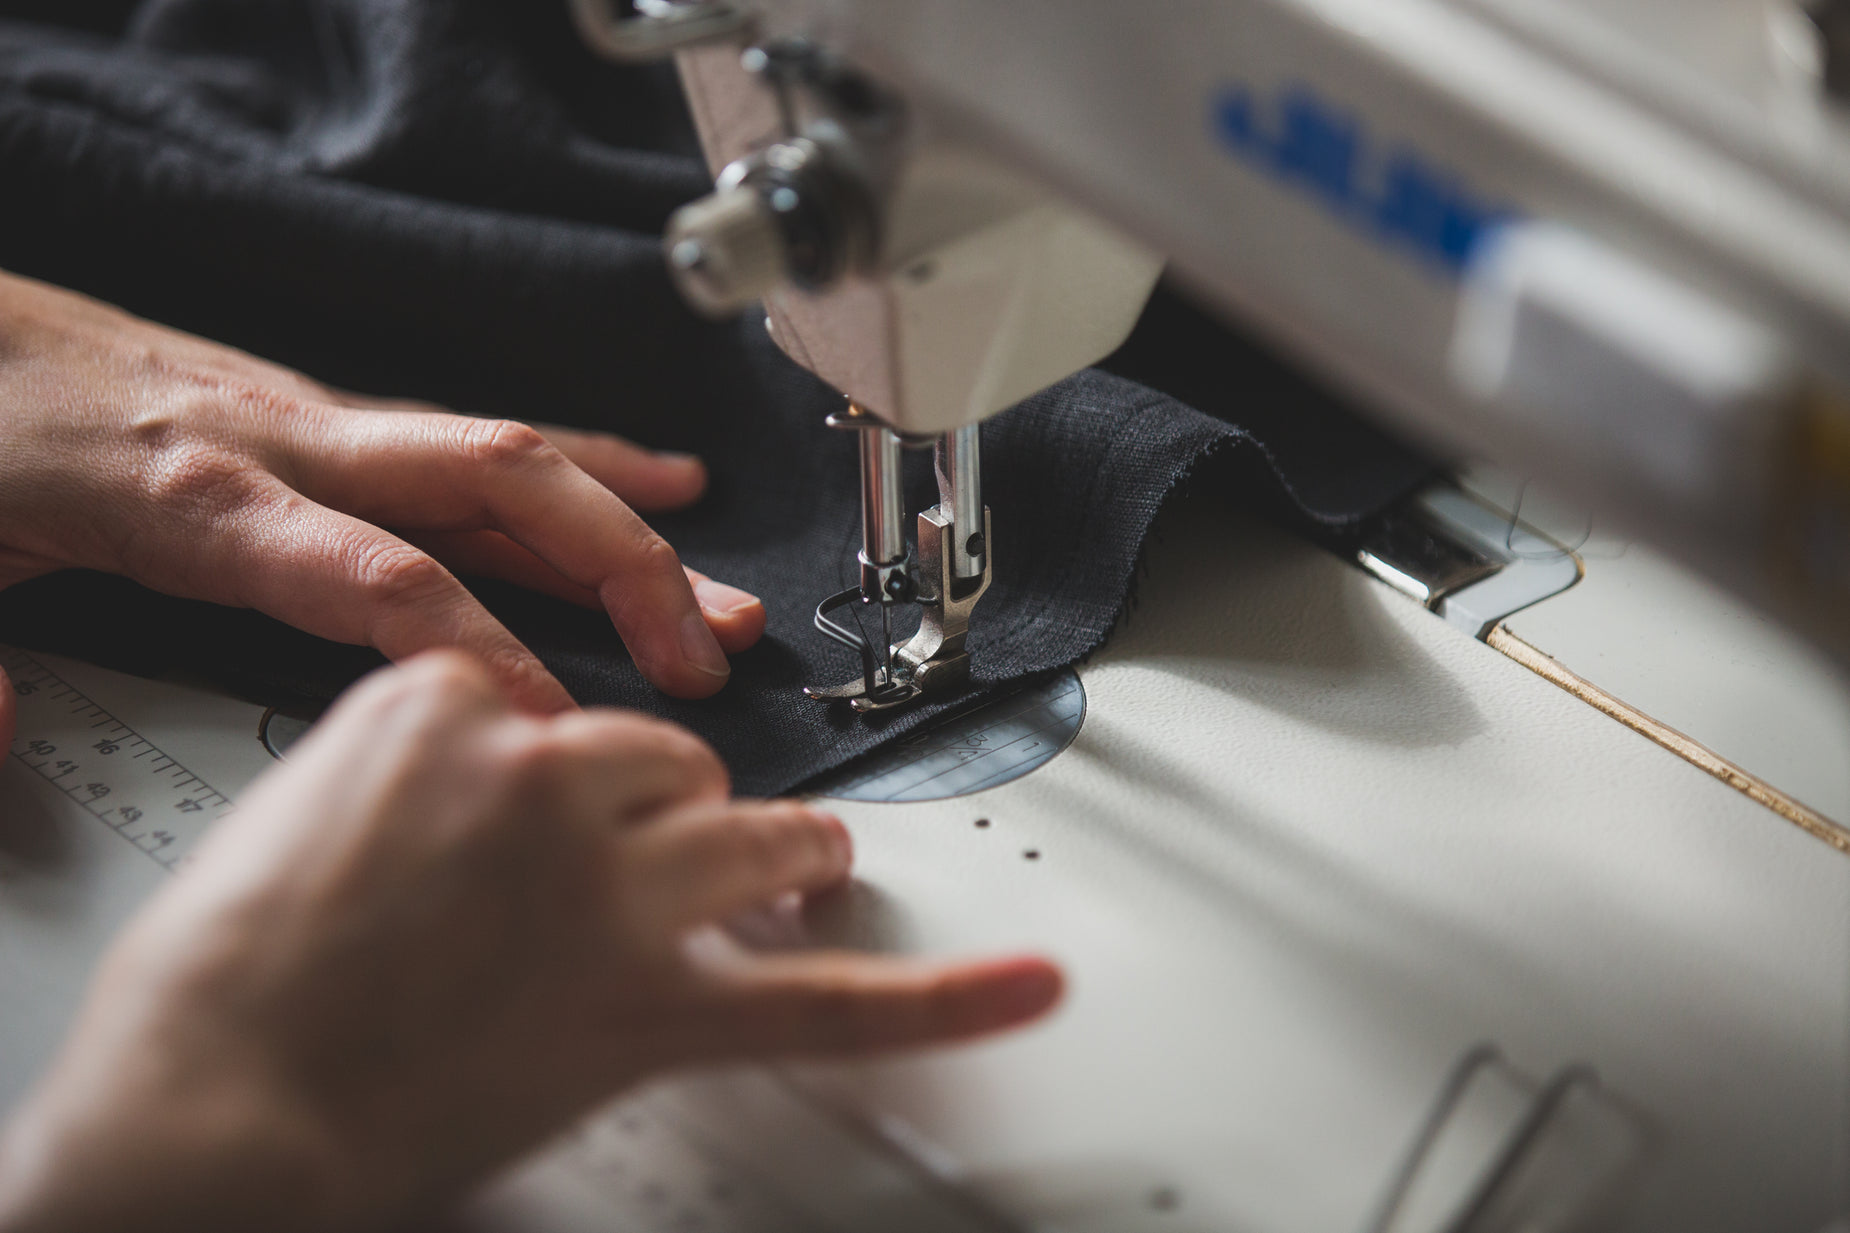 two hands operate the sewing machine while it is  fabric